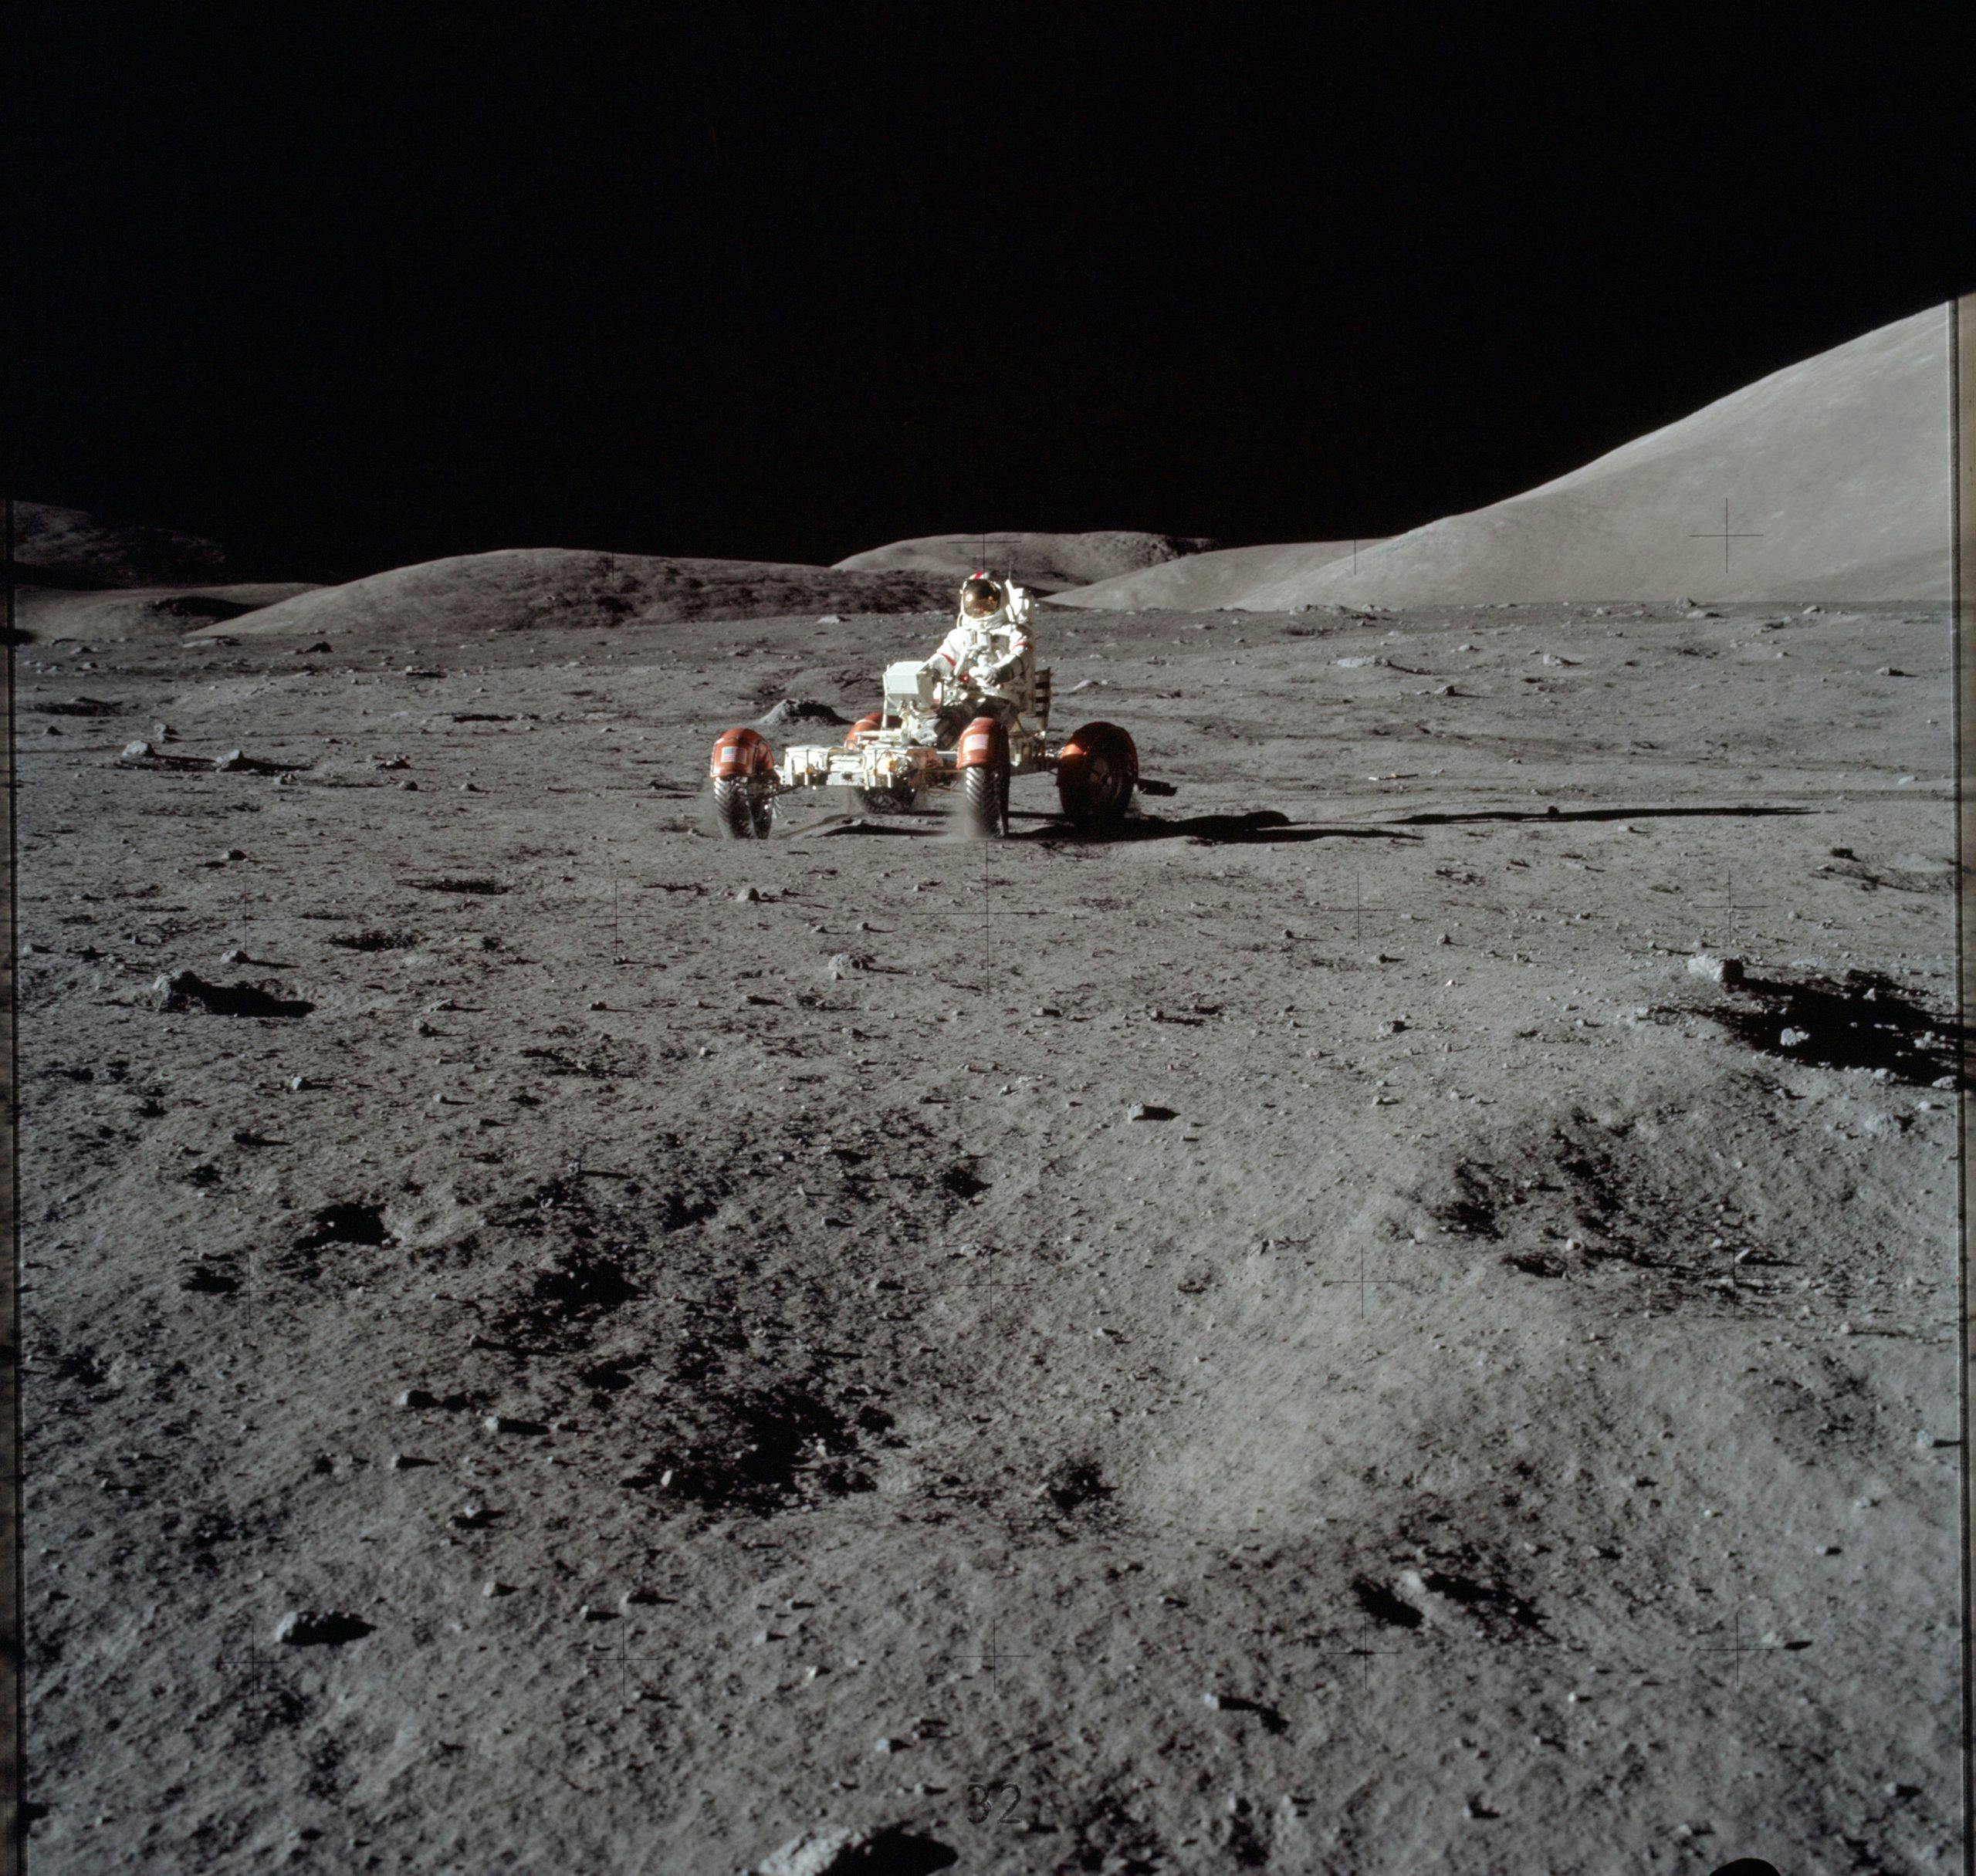 An astronaut in a space suit sits on top of a red four-wheeled buggy on a grey rocky and sandy landscape.